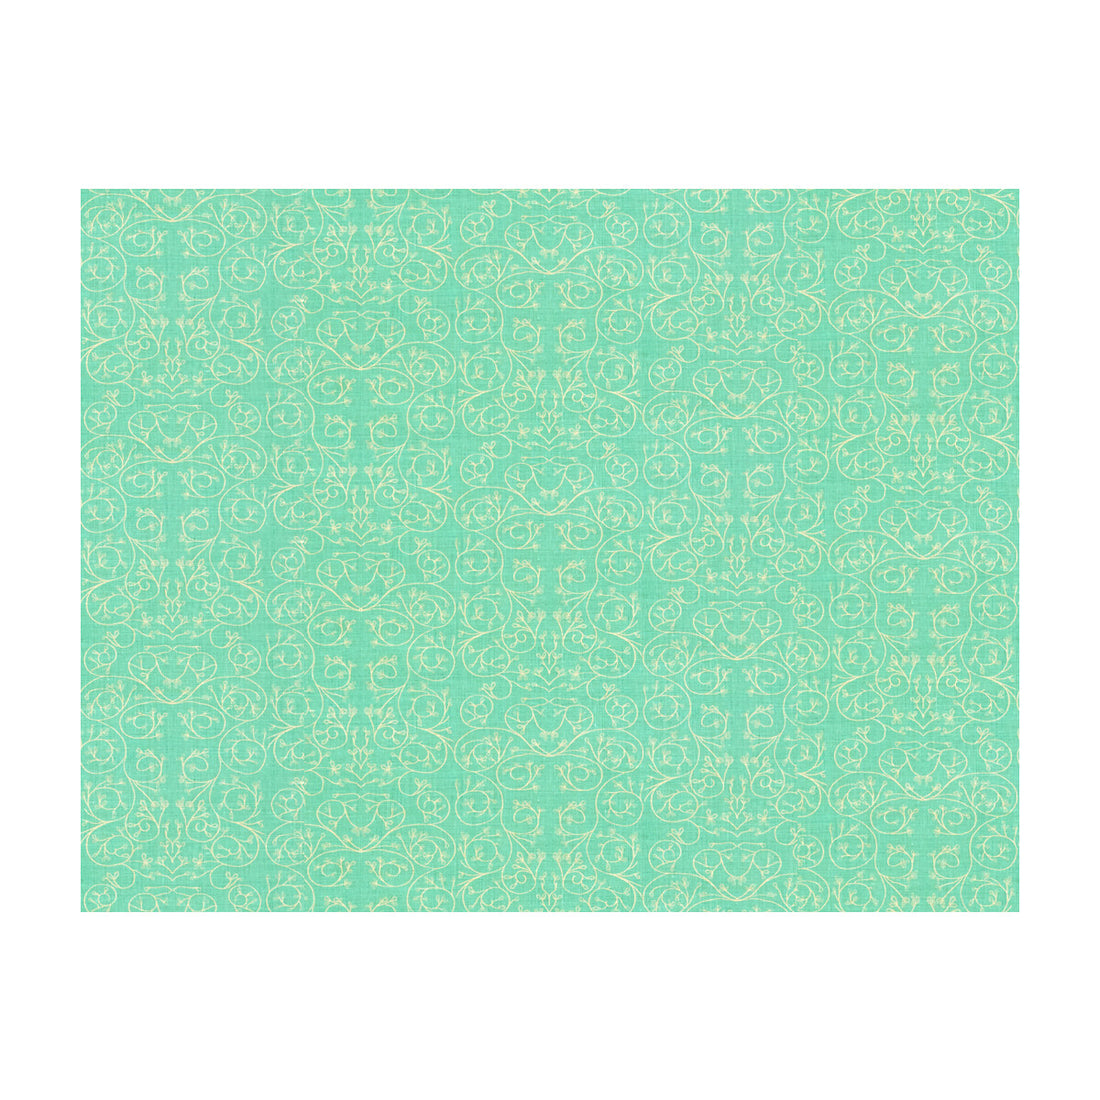 Garden Reverse fabric in aqua color - pattern GWF-3512.13.0 - by Lee Jofa Modern in the Allegra Hicks Garden collection